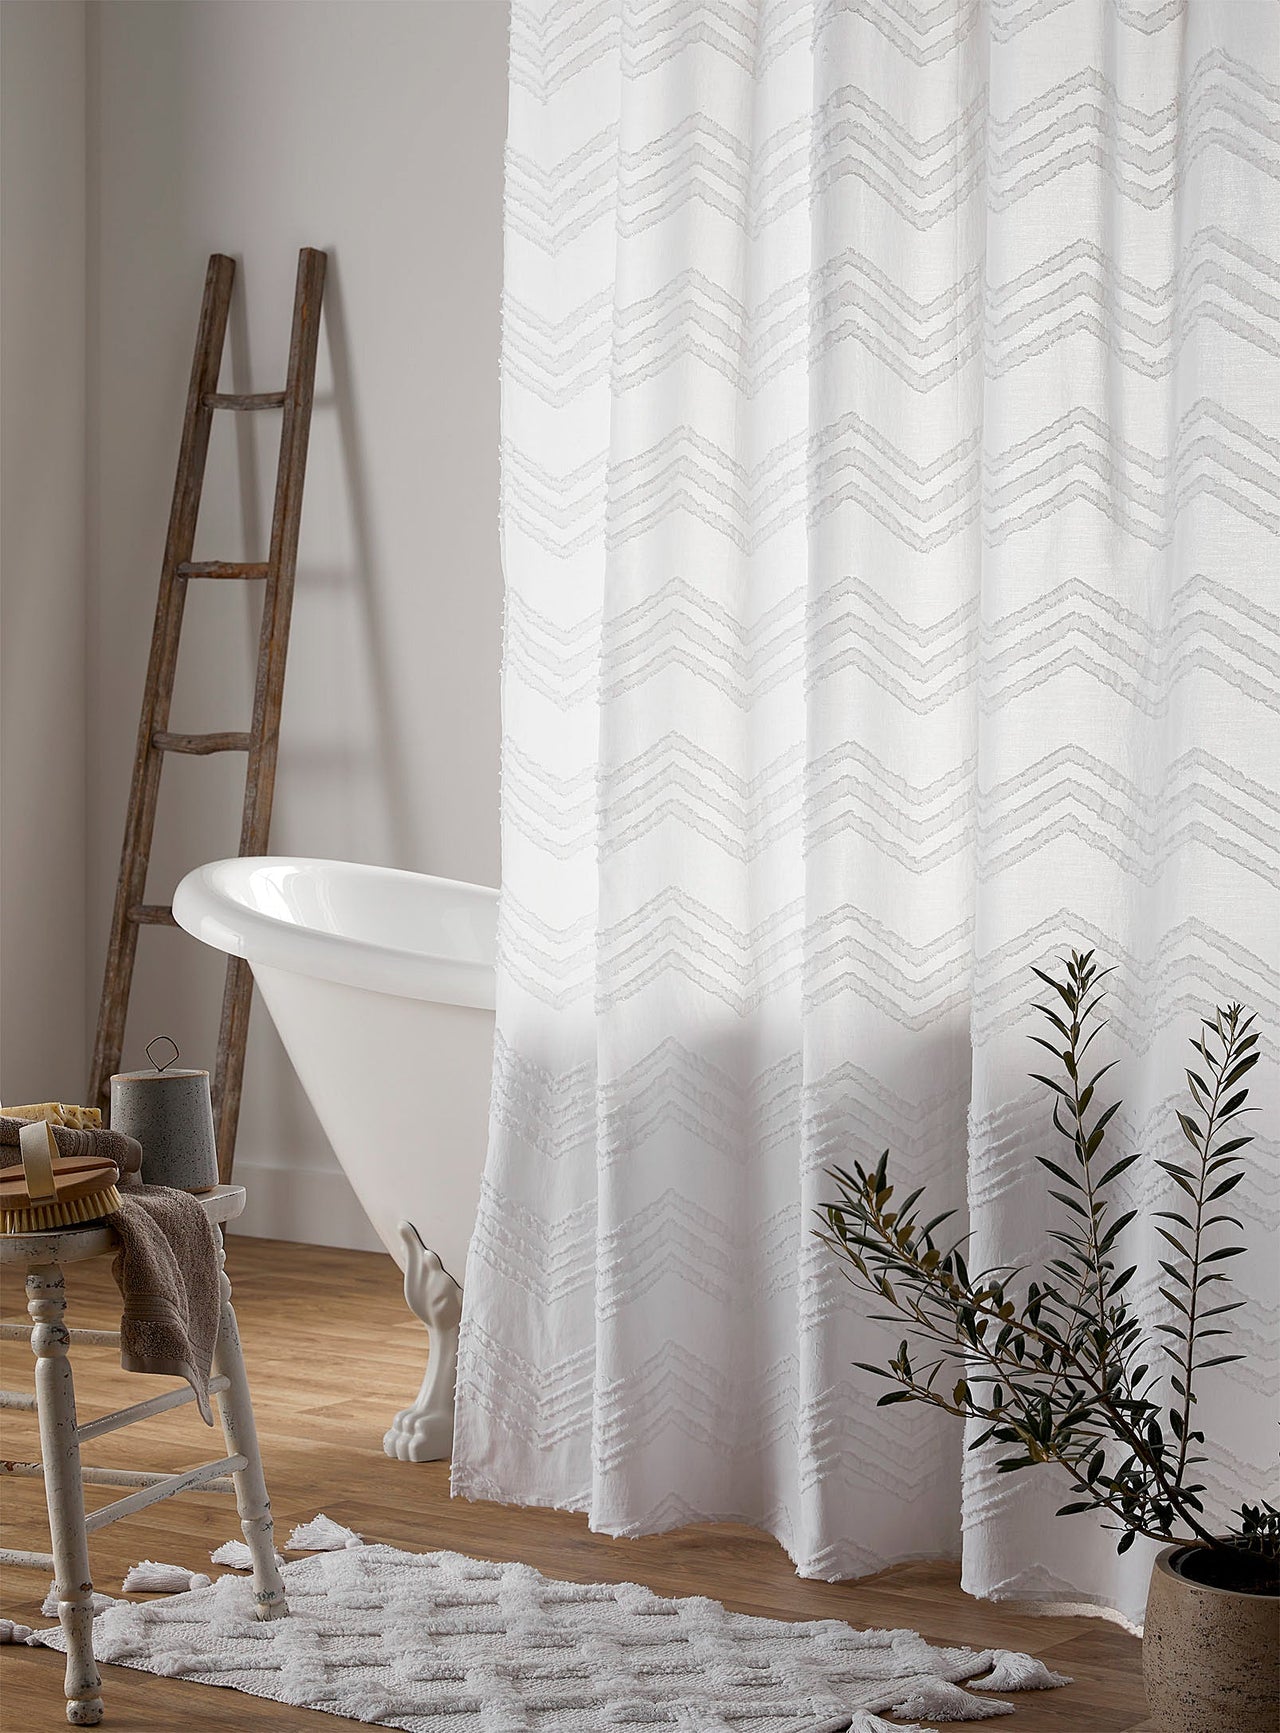 Zigzags shower curtain